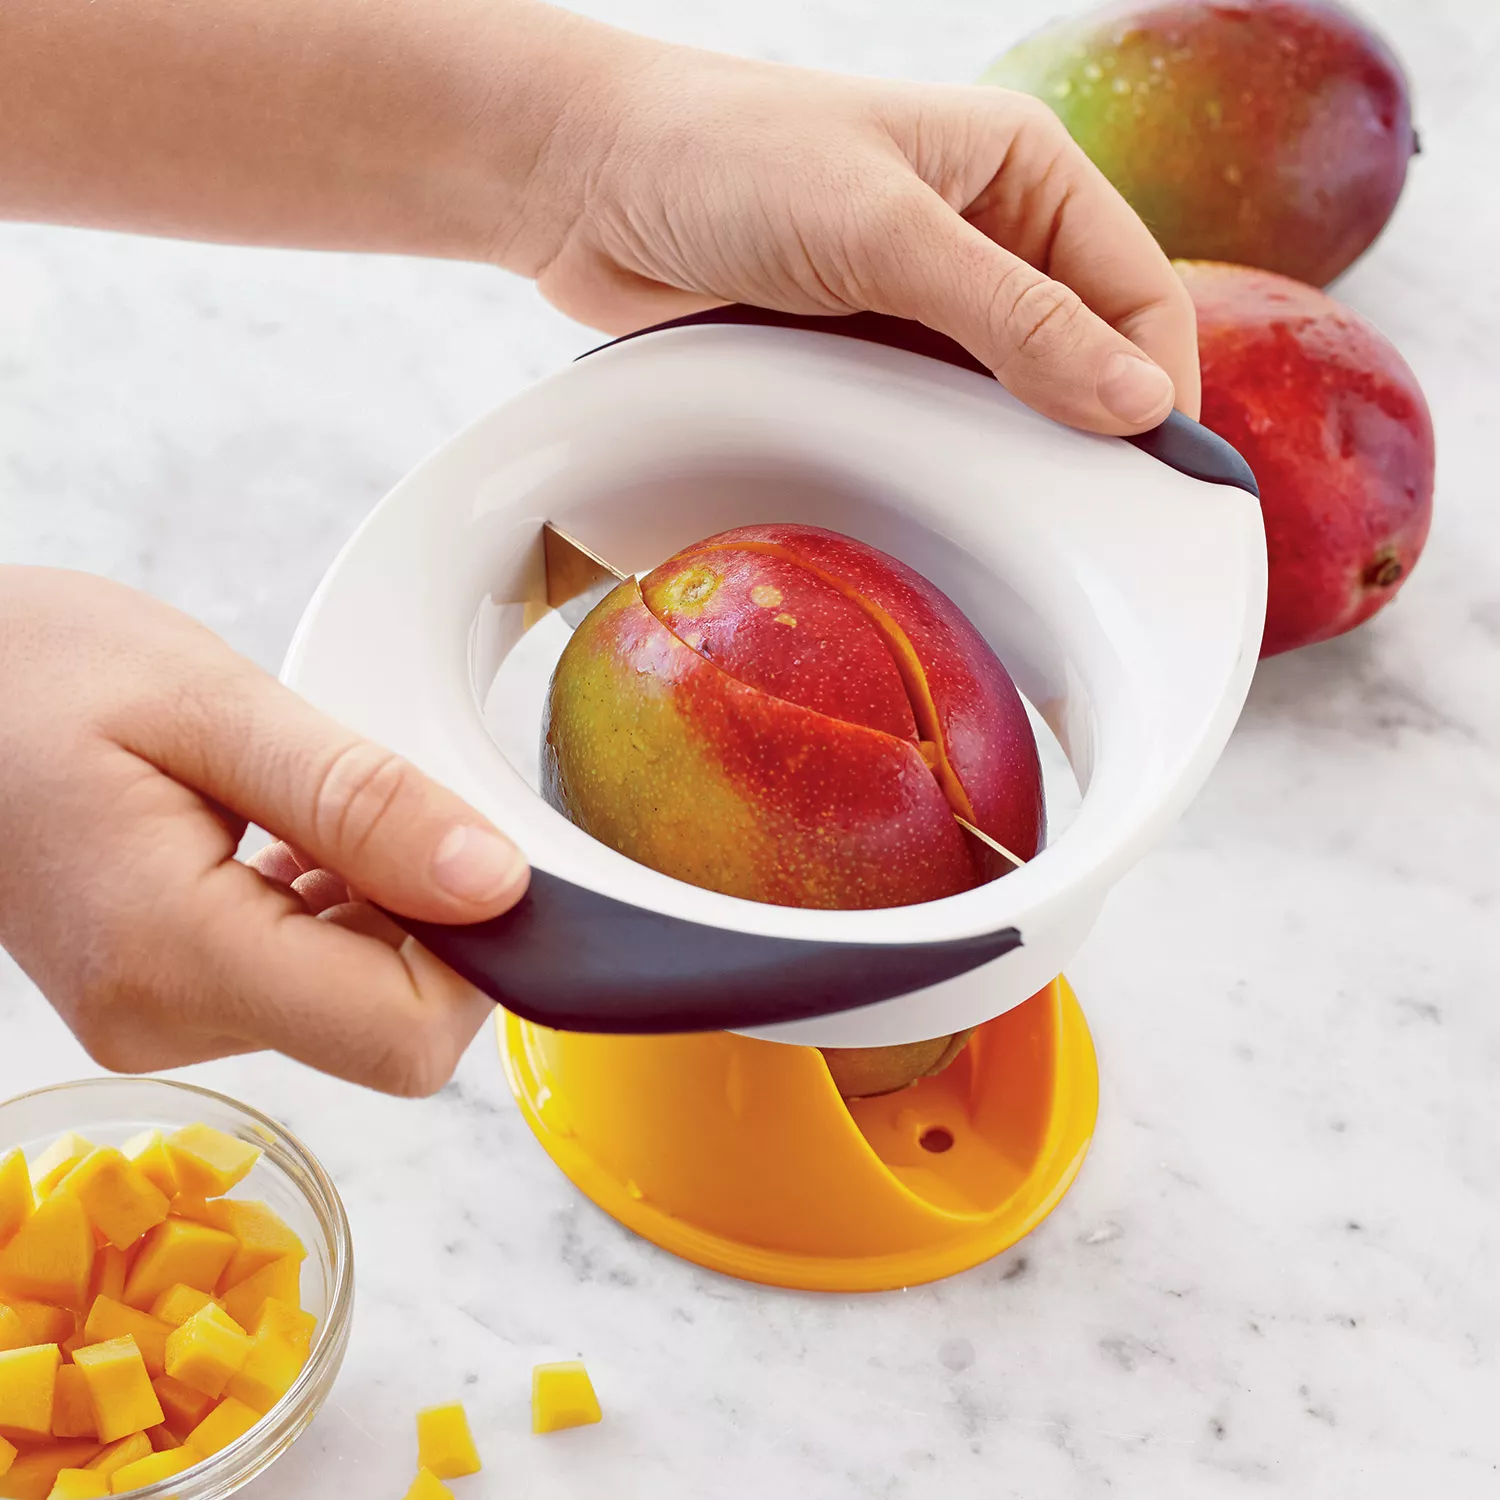 Zyliss 3-in-1 Mango Slicer Peeler and Pit Remover Tool